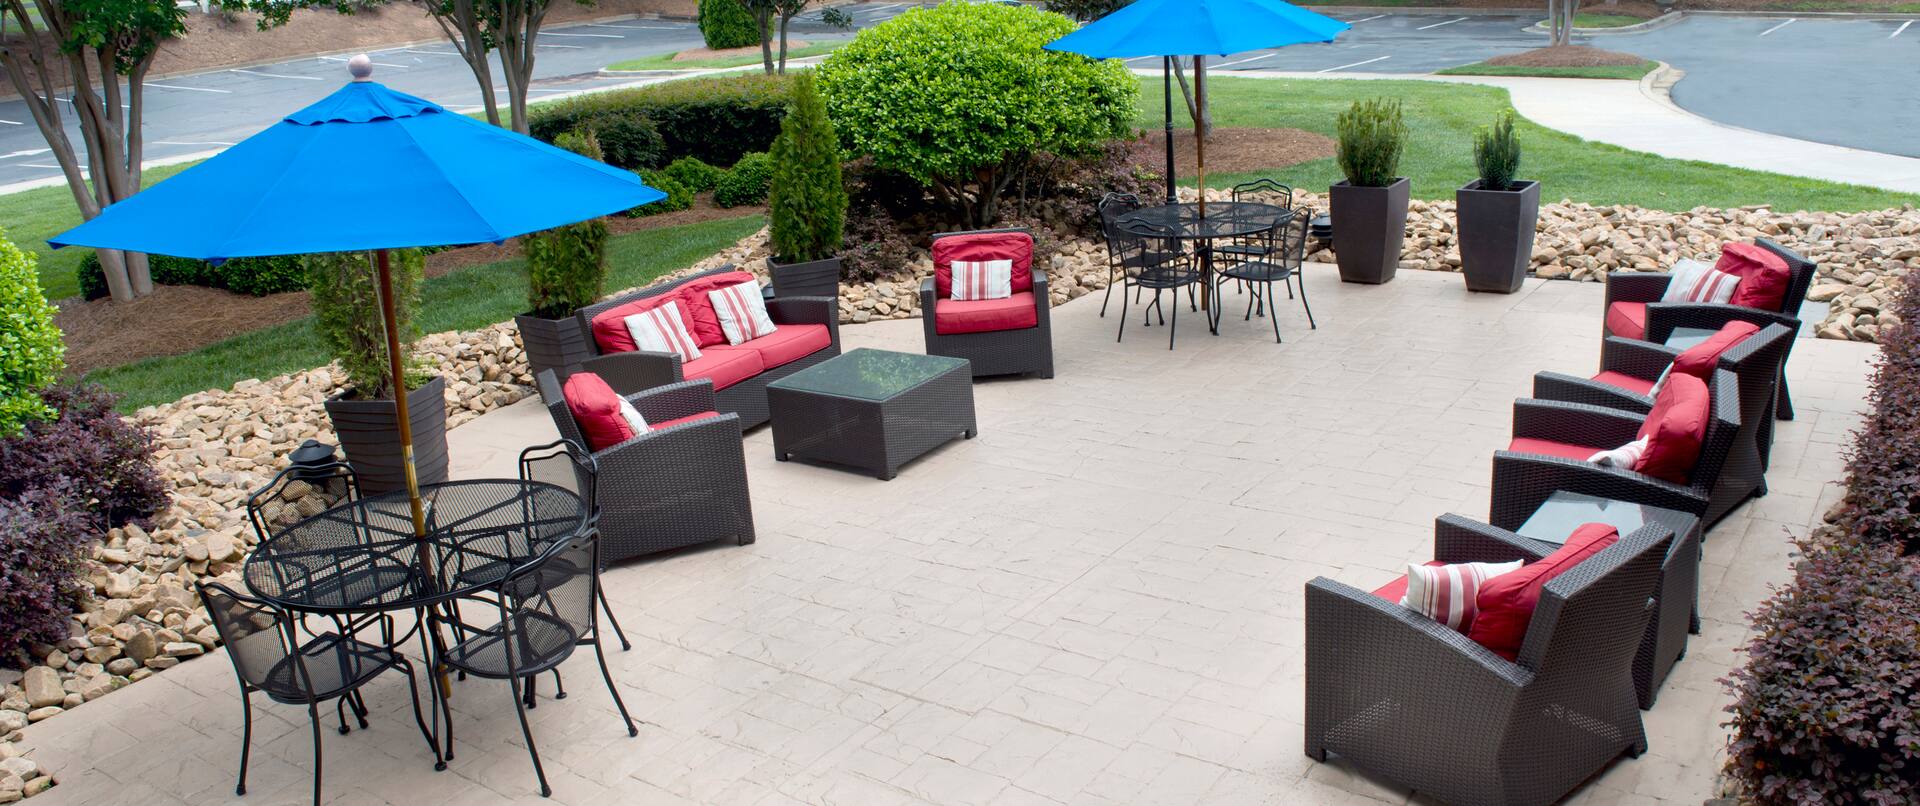 Tables With Umbrellas, and Soft Seating on Patio by Parking Lot